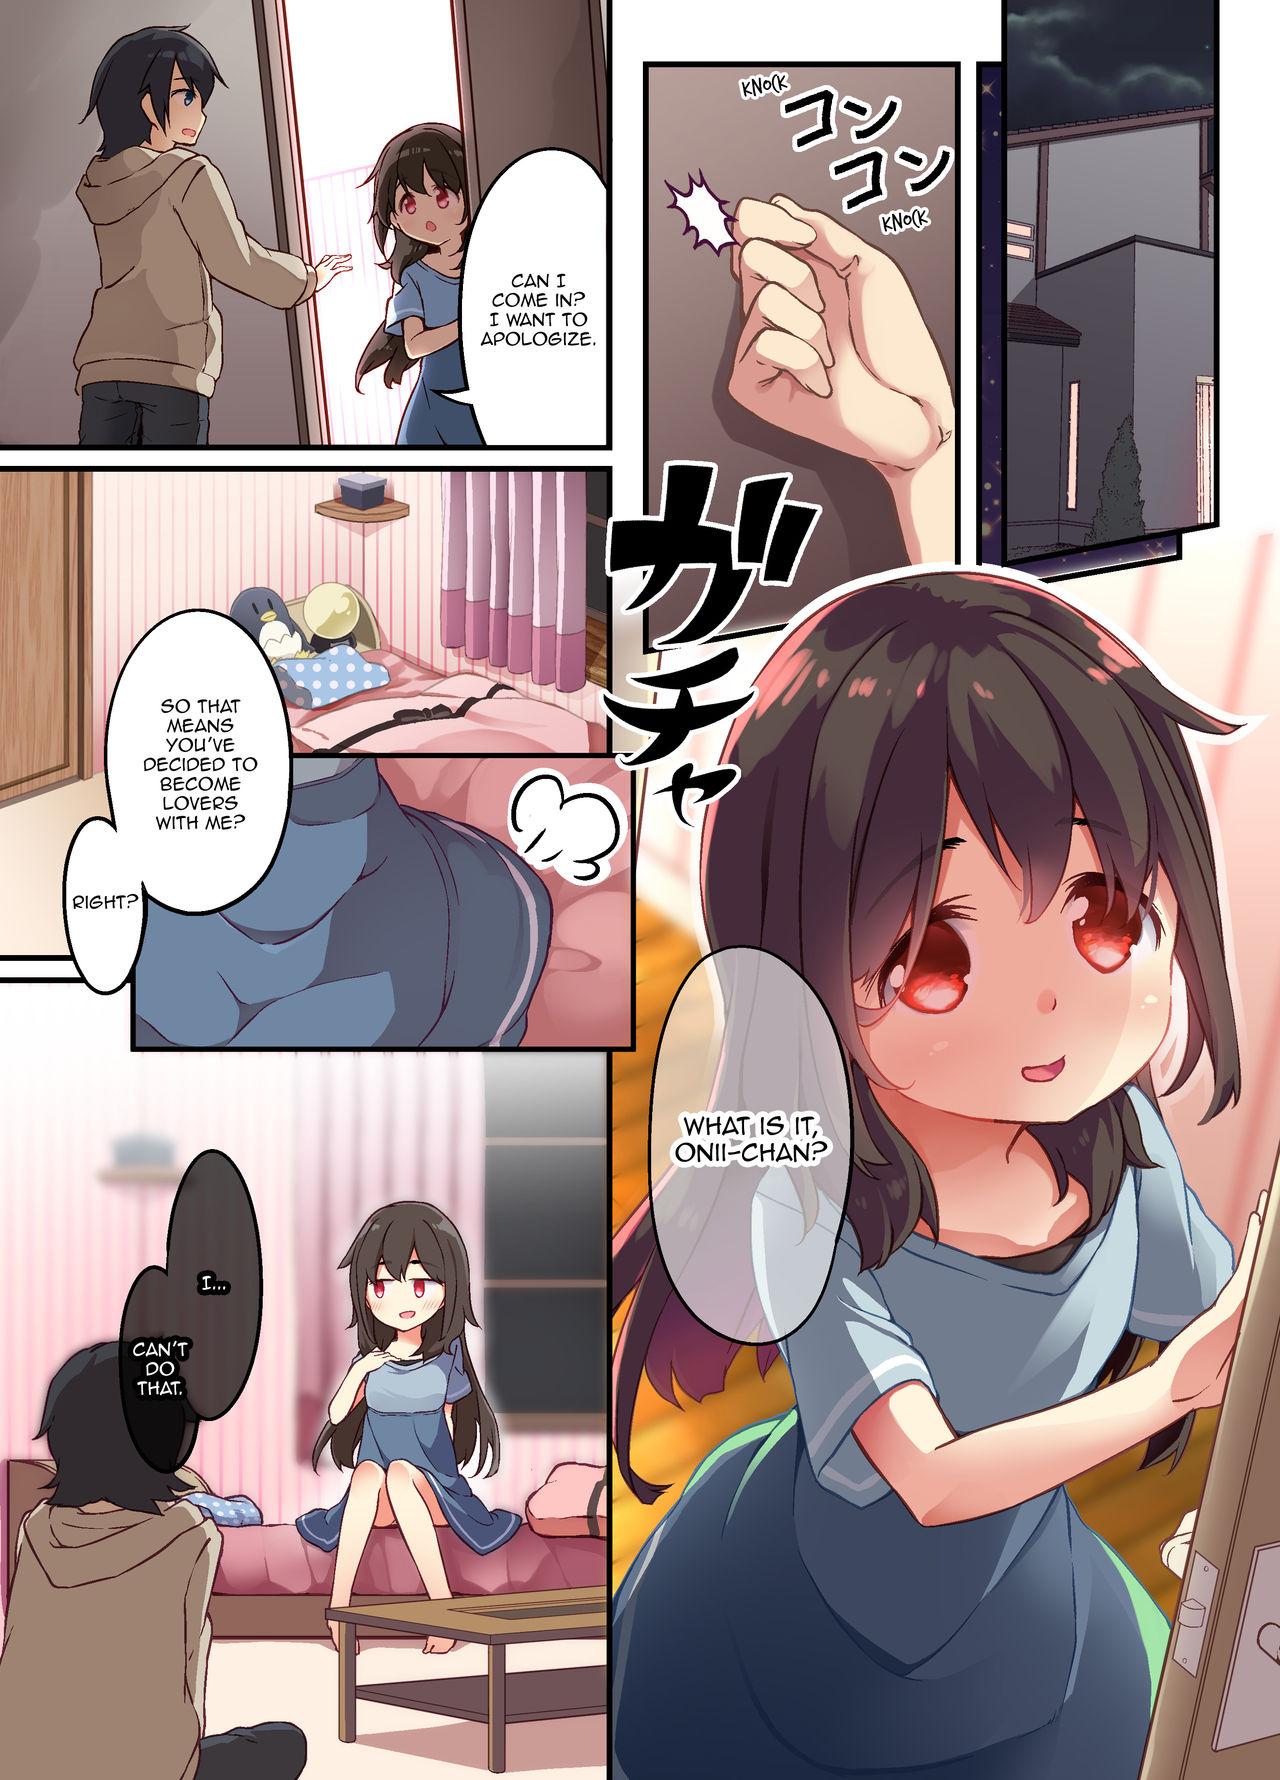 A Yandere Little Sister Wants to Be Impregnated by Her Big Brother, So She Switches Bodies With Him and They Have Baby-Making Sex 5